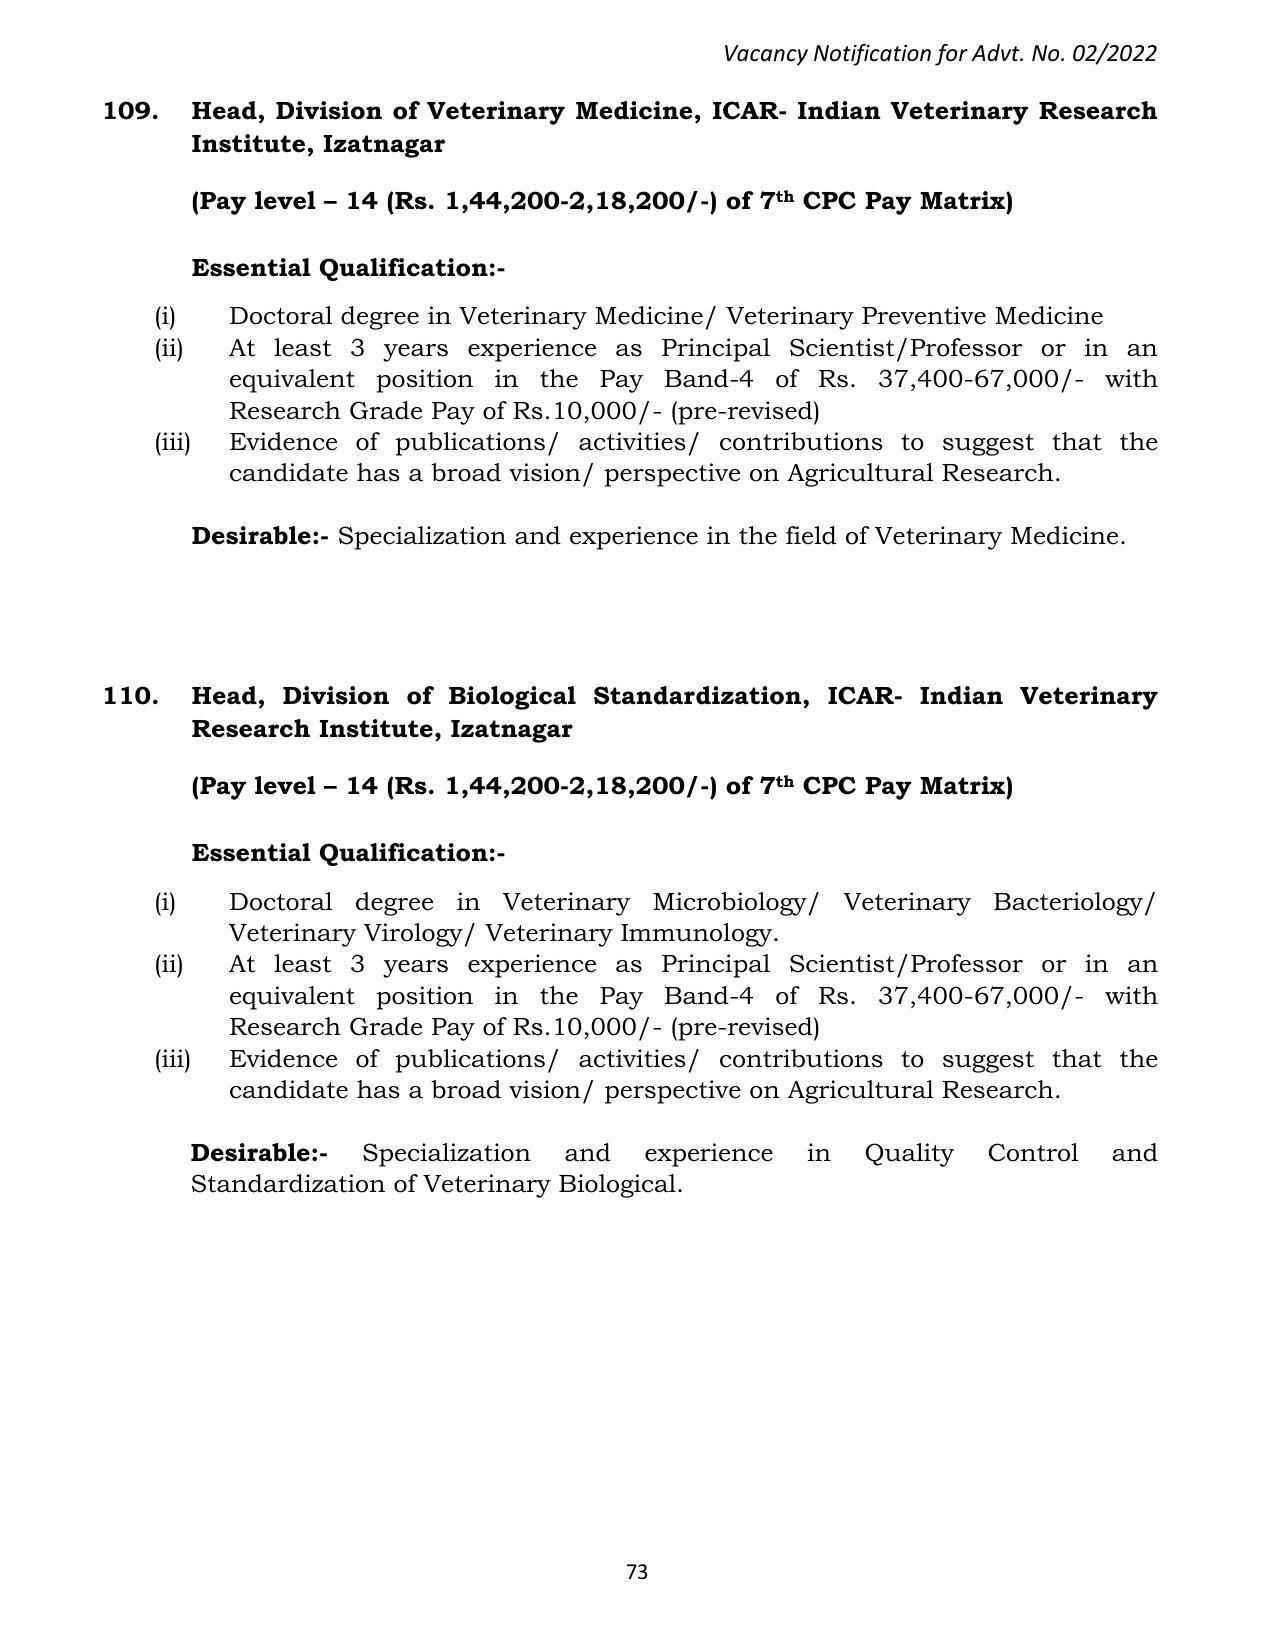 ASRB Non-Research Management Recruitment 2022 - Page 199